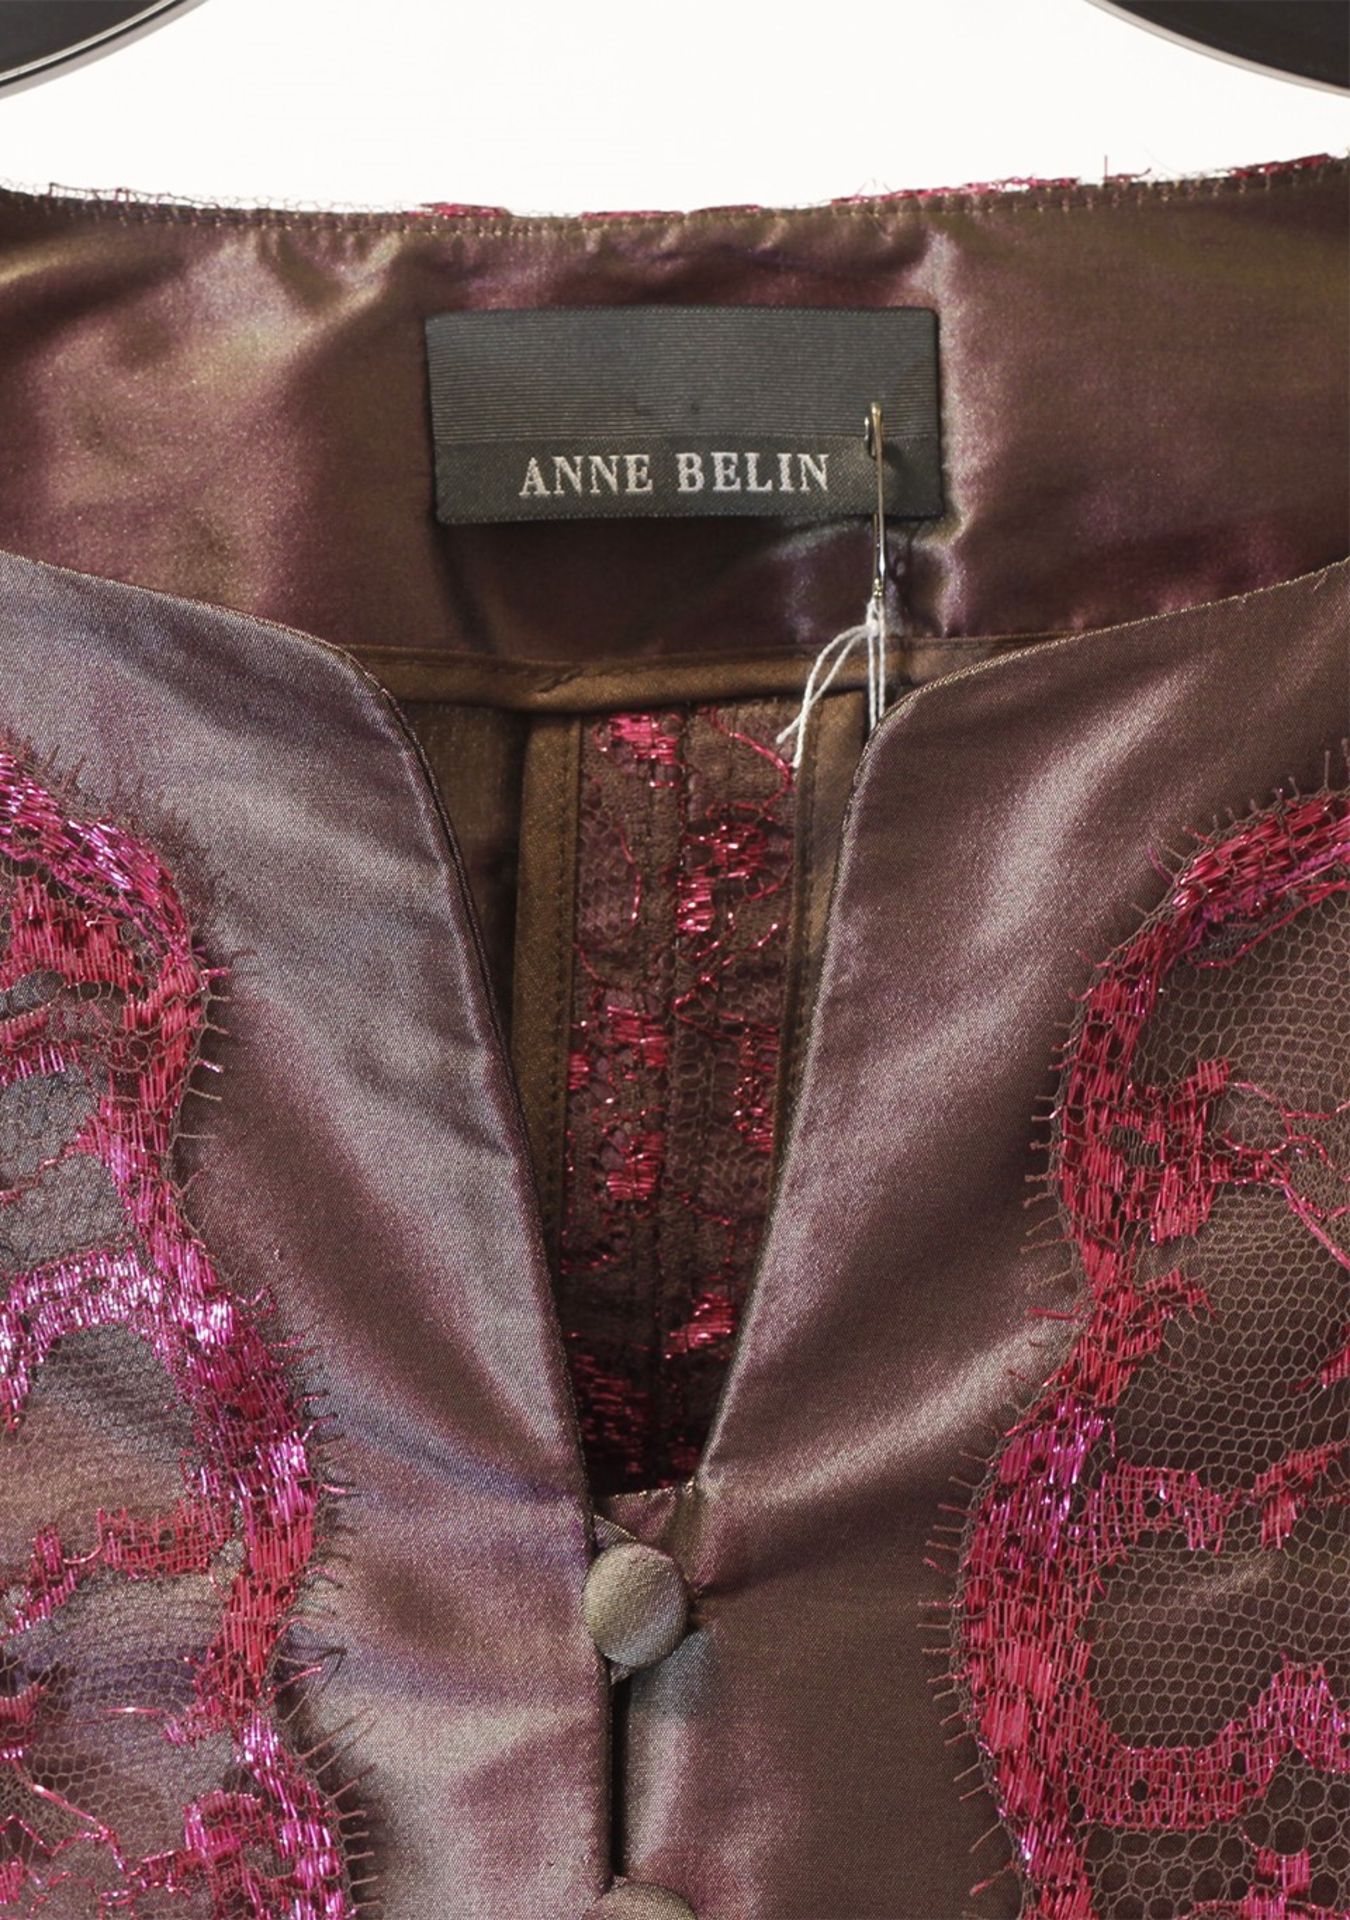 1 x Anne Belin Purple Pink Jacket - From a High End Clothing Boutique In The Netherlands - Image 2 of 11